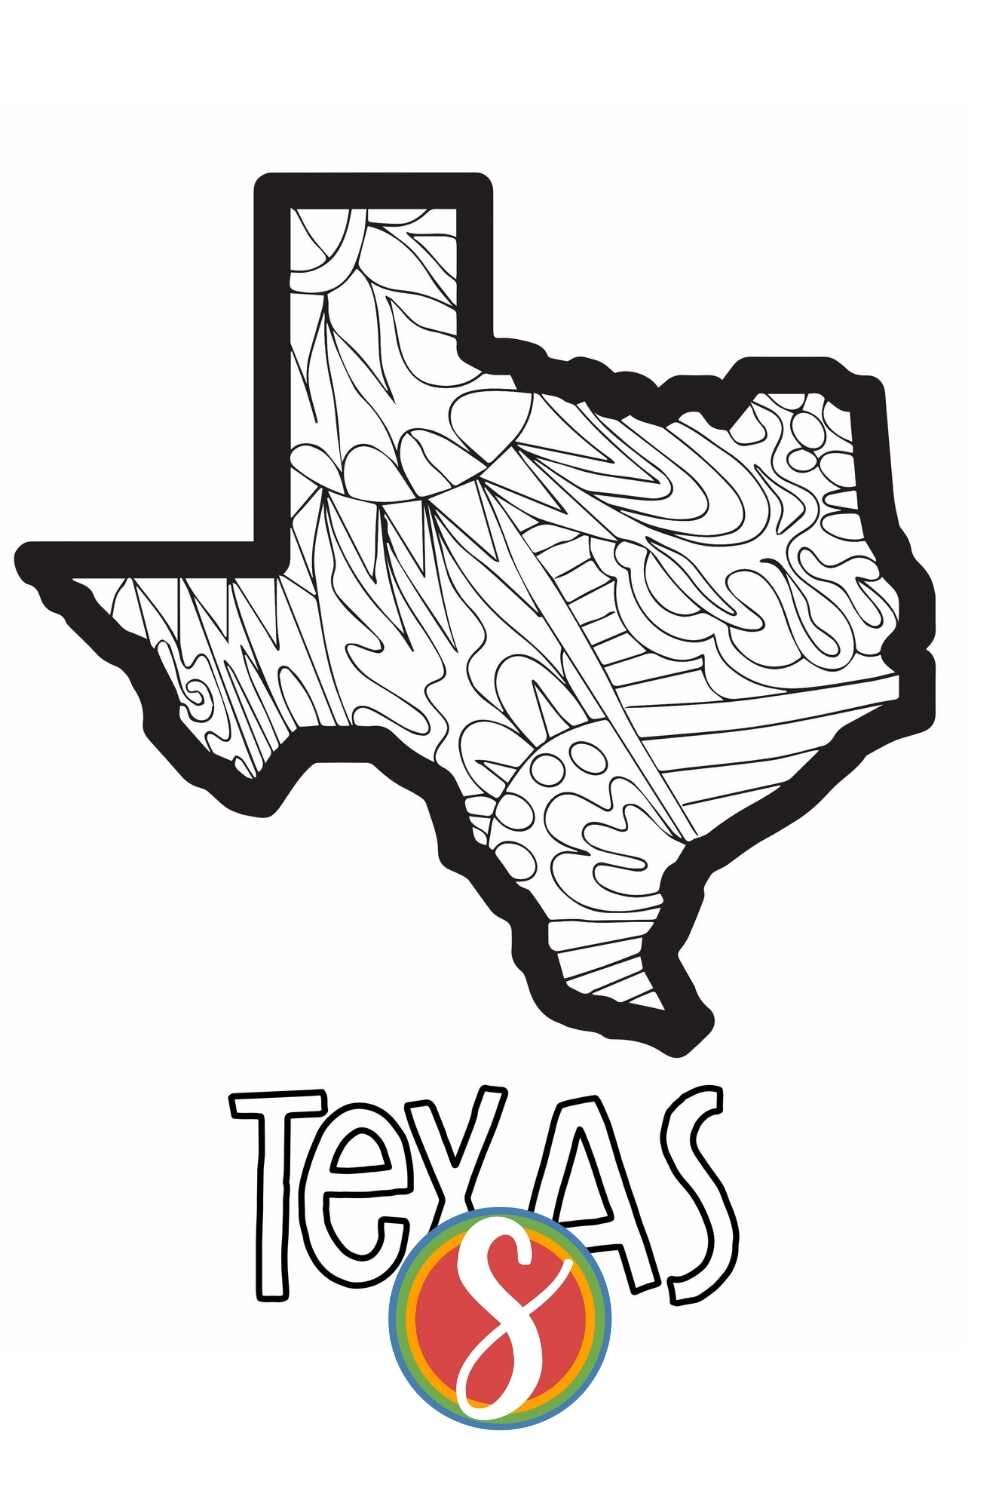 Free printable Texas  coloring page from Stevie Doodles - print and color 4 free Texas themed activity pages in this post from Stevie Doodles and find your state too!